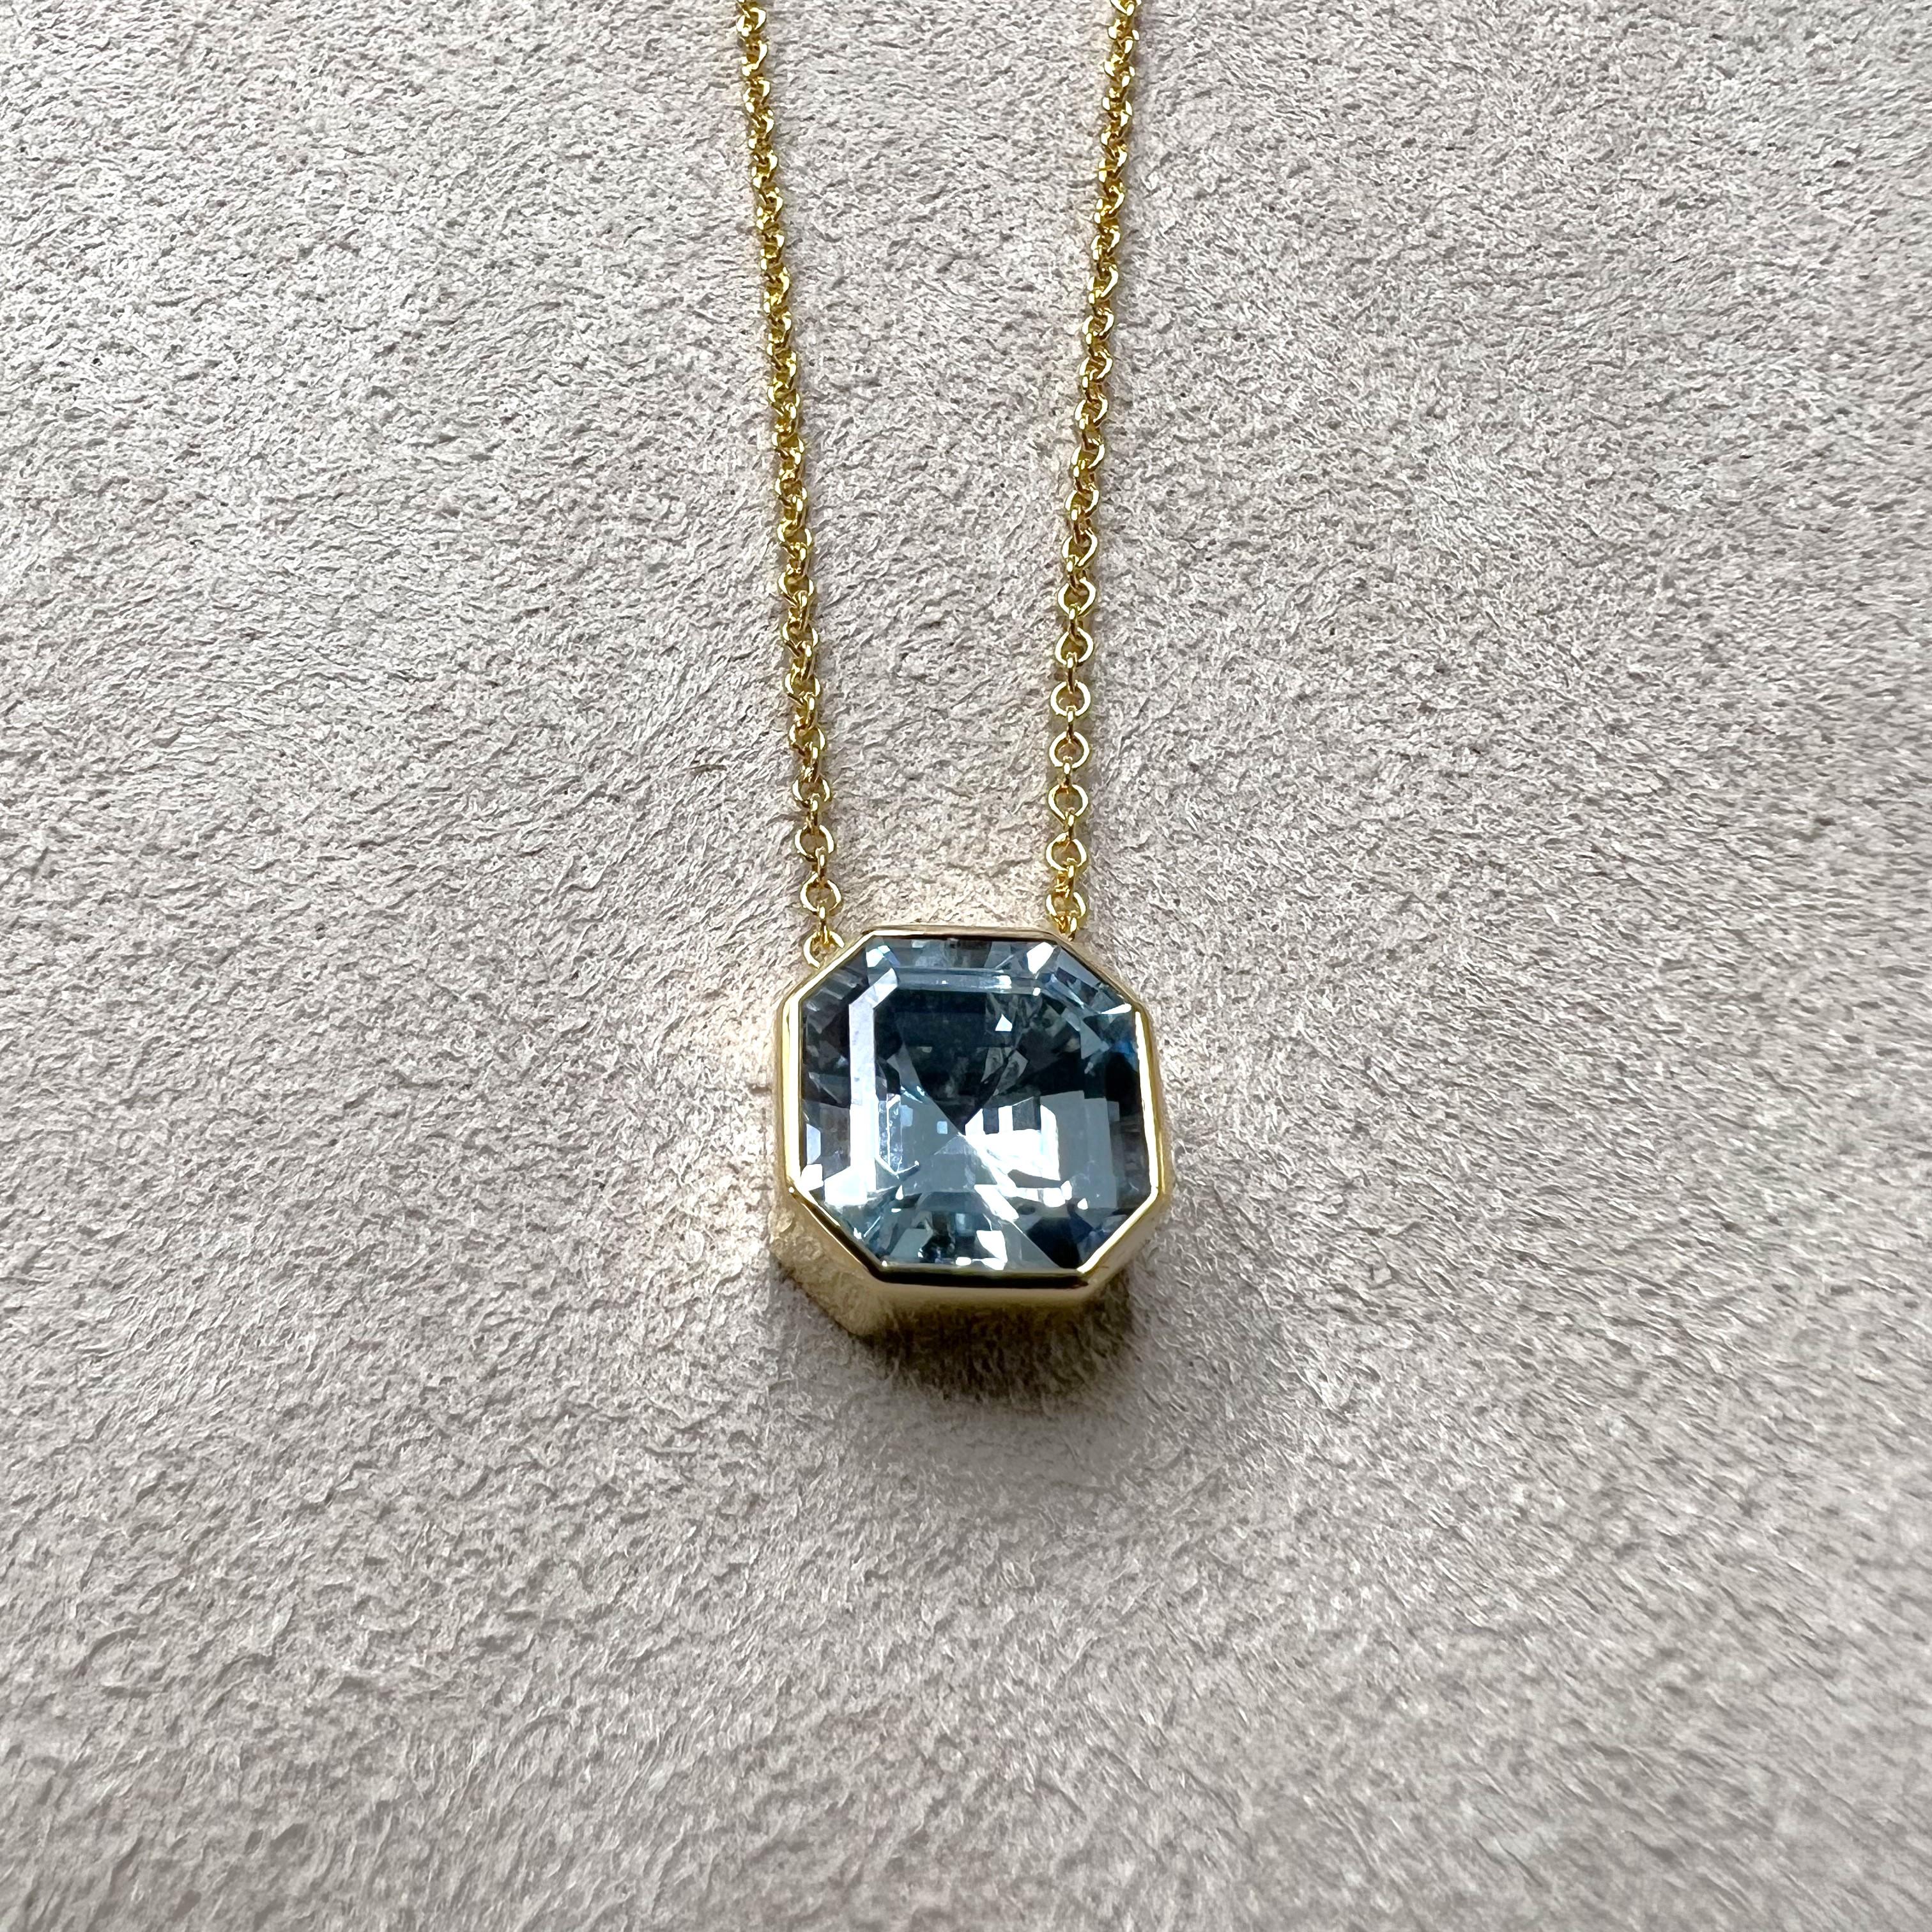 Created in 18 karat yellow gold
Blue Topaz 5 carats approx.
18 inch necklace with loops at 16 and 17 inch
Lobster lock

 About the Designers ~ Dharmesh & Namrata

Drawing inspiration from little things, Dharmesh & Namrata Kothari have created an